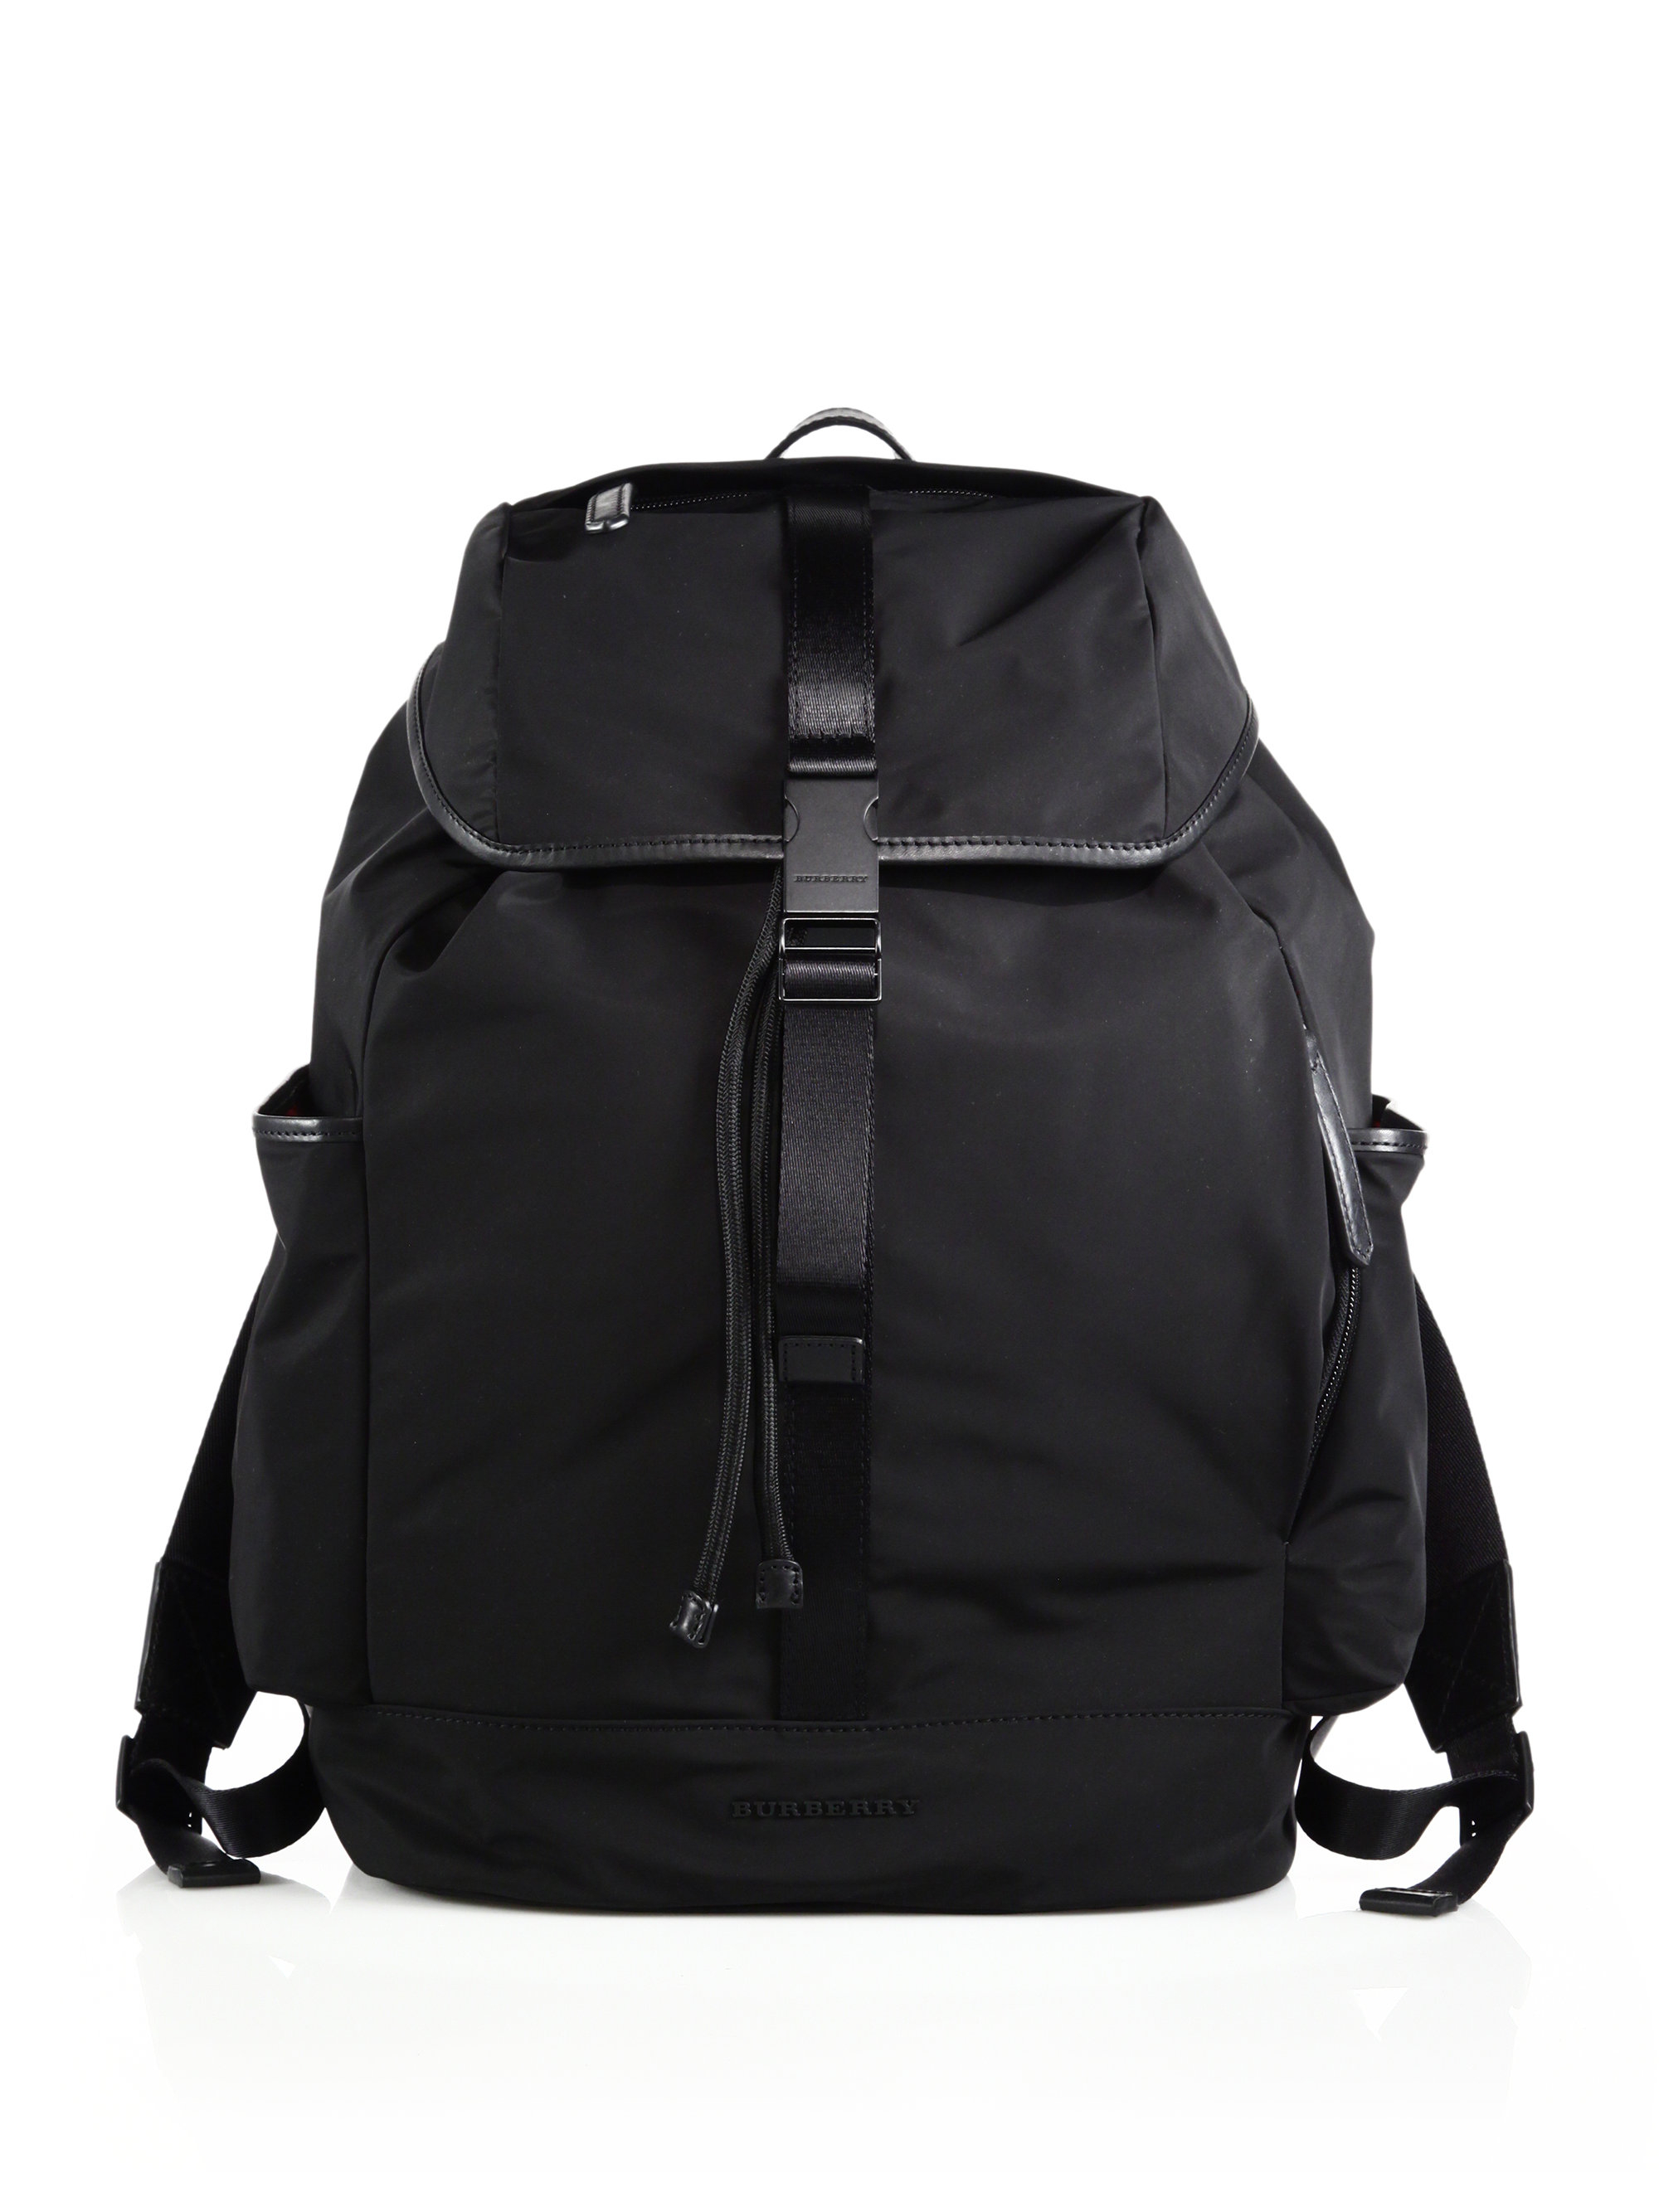 burberry mens backpack sale